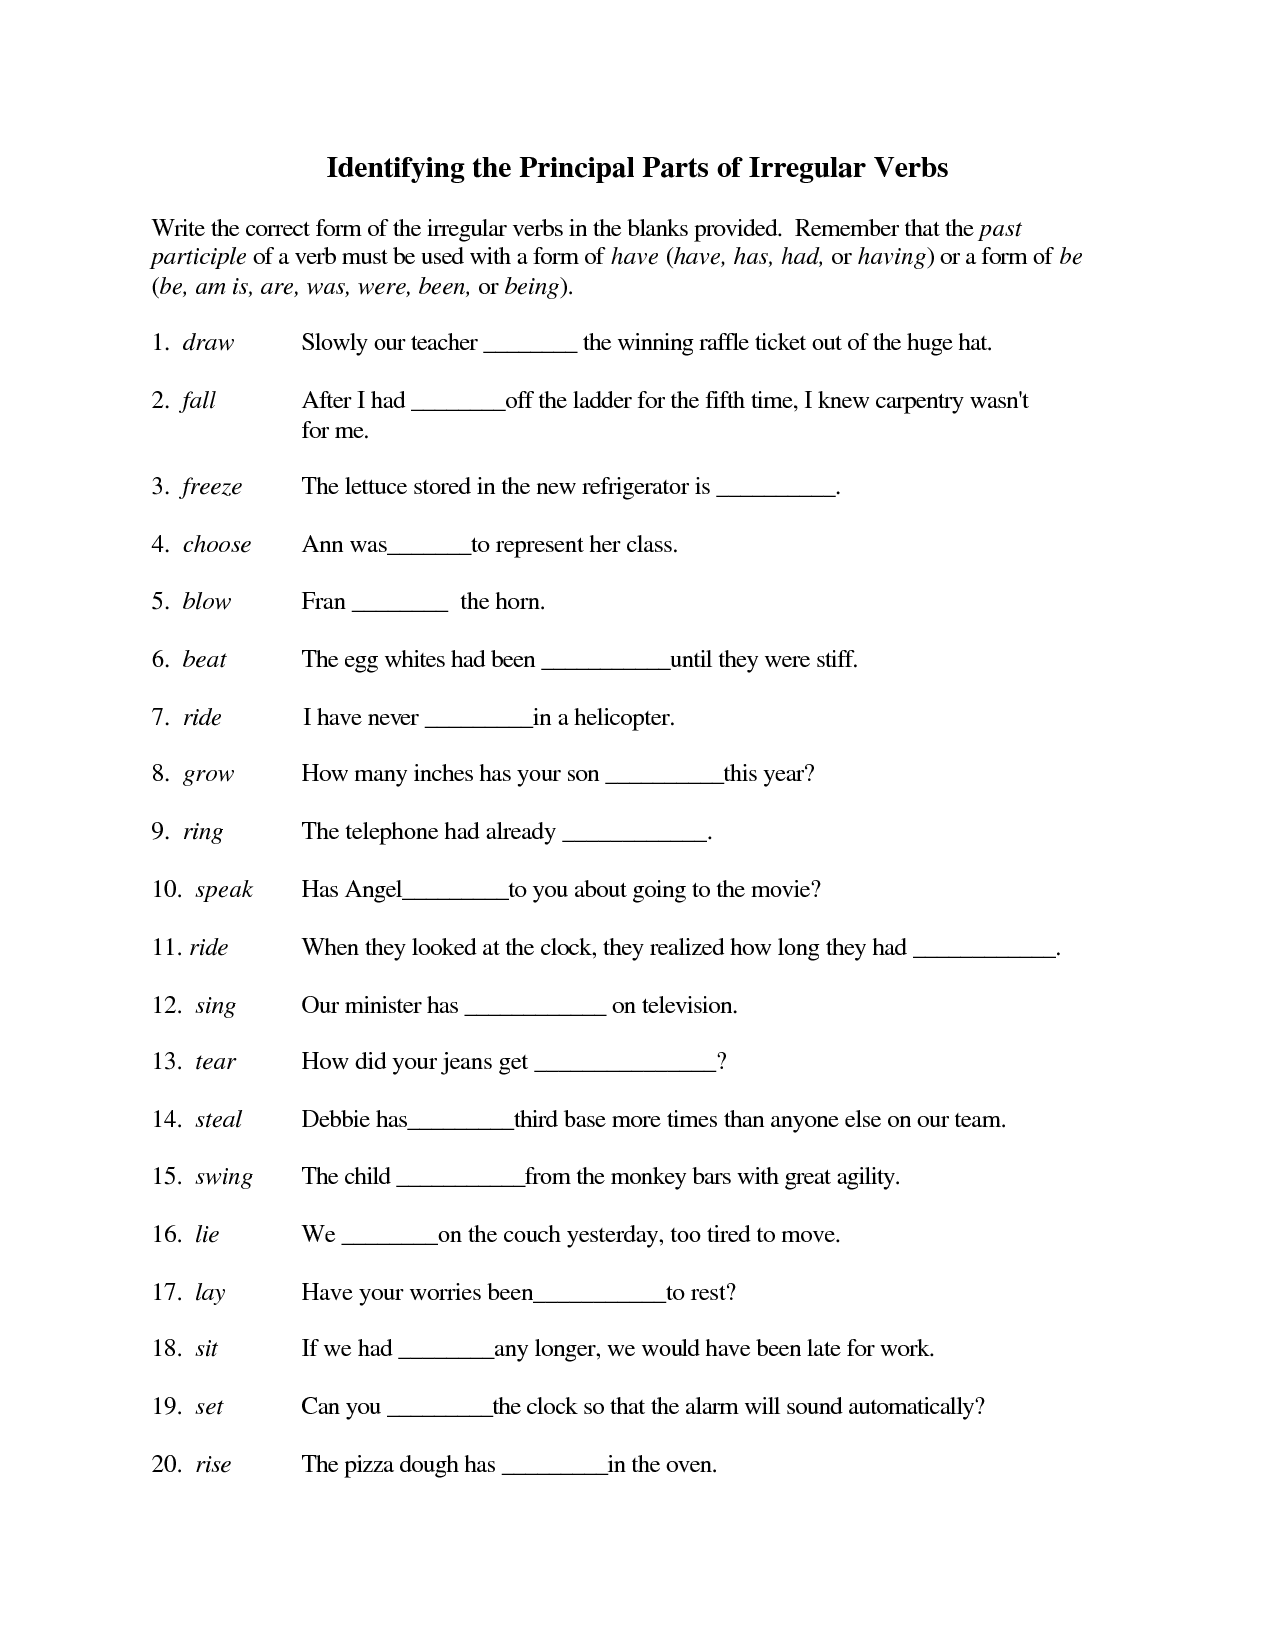 top-10-writing-irregular-verbs-worksheet-answers-pictures-small-letter-worksheet